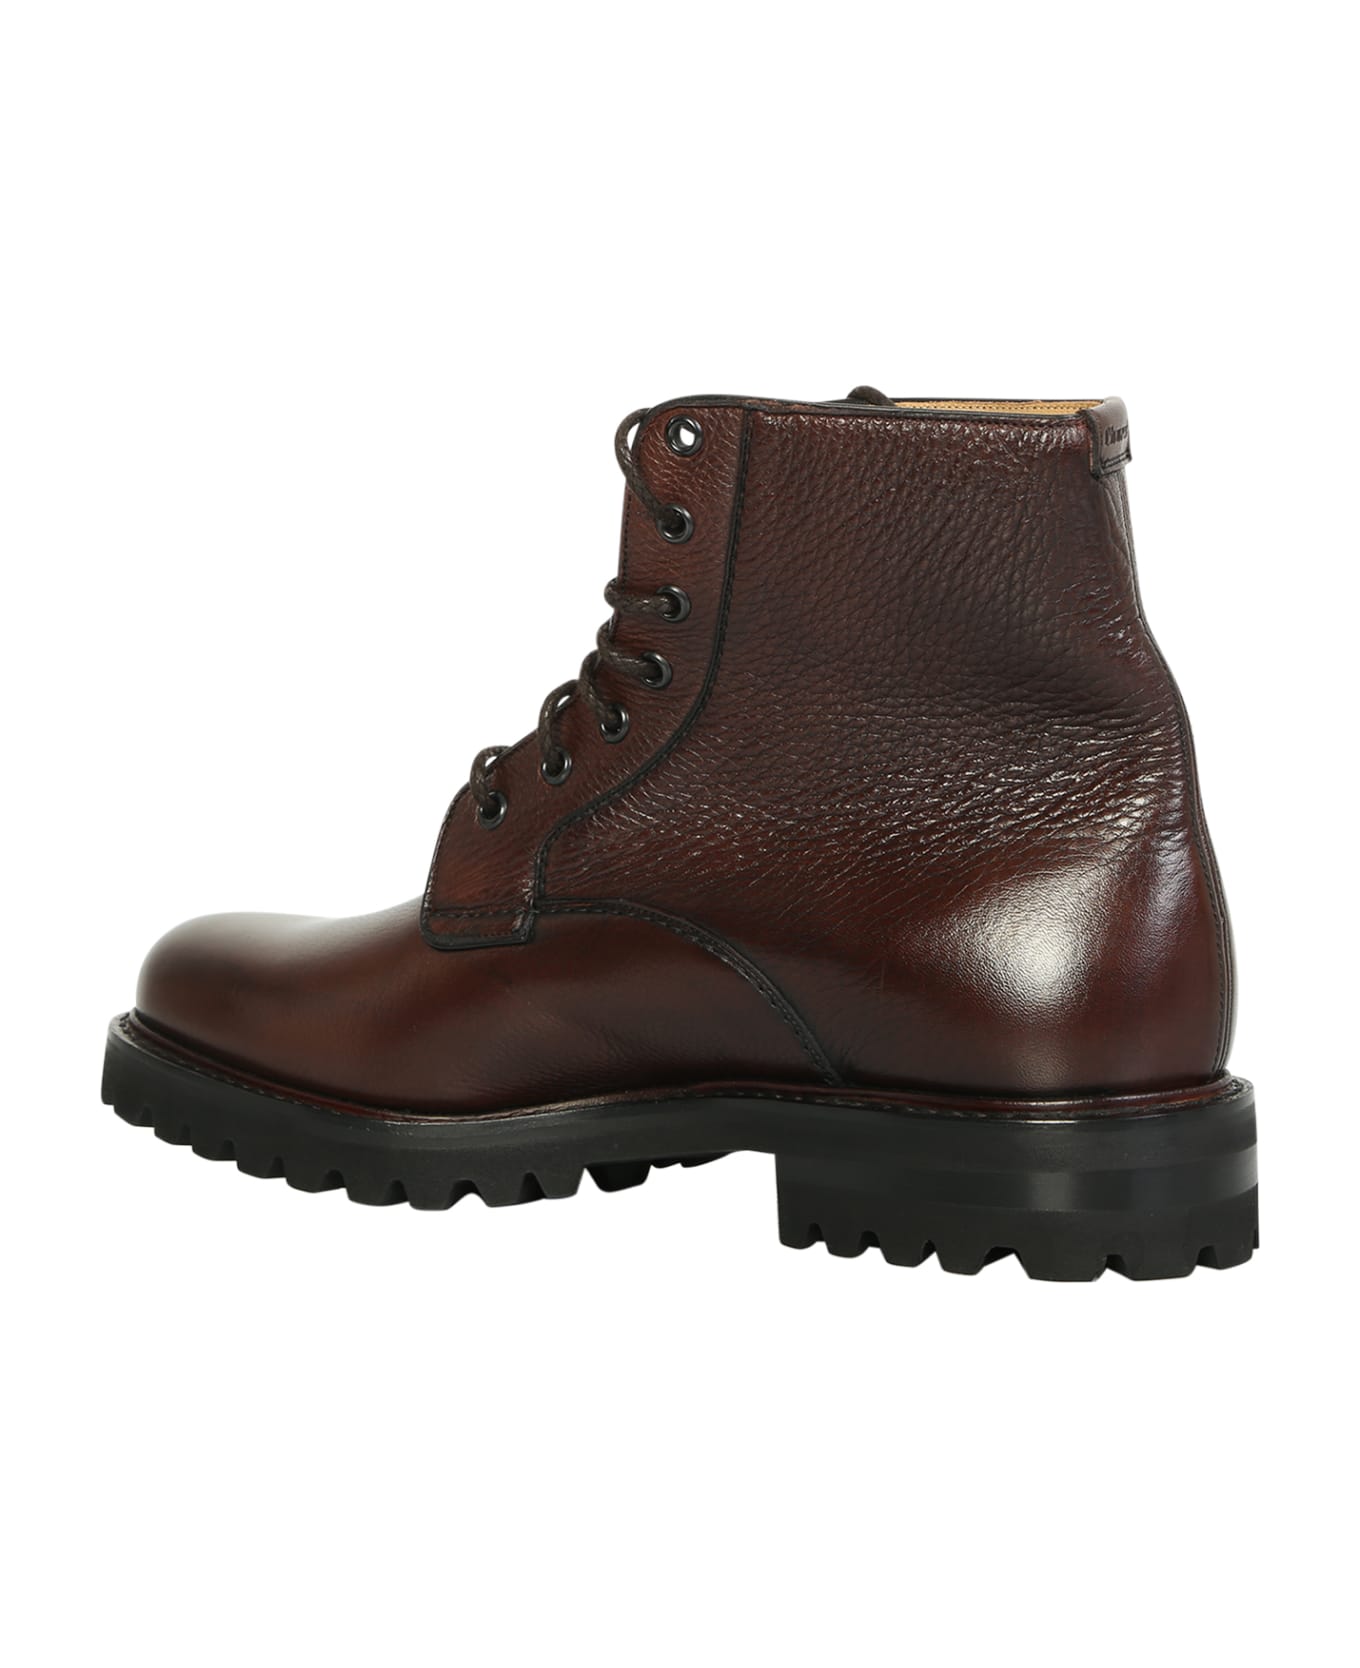 Church's Coalport Ankle Boots - Brown ブーツ